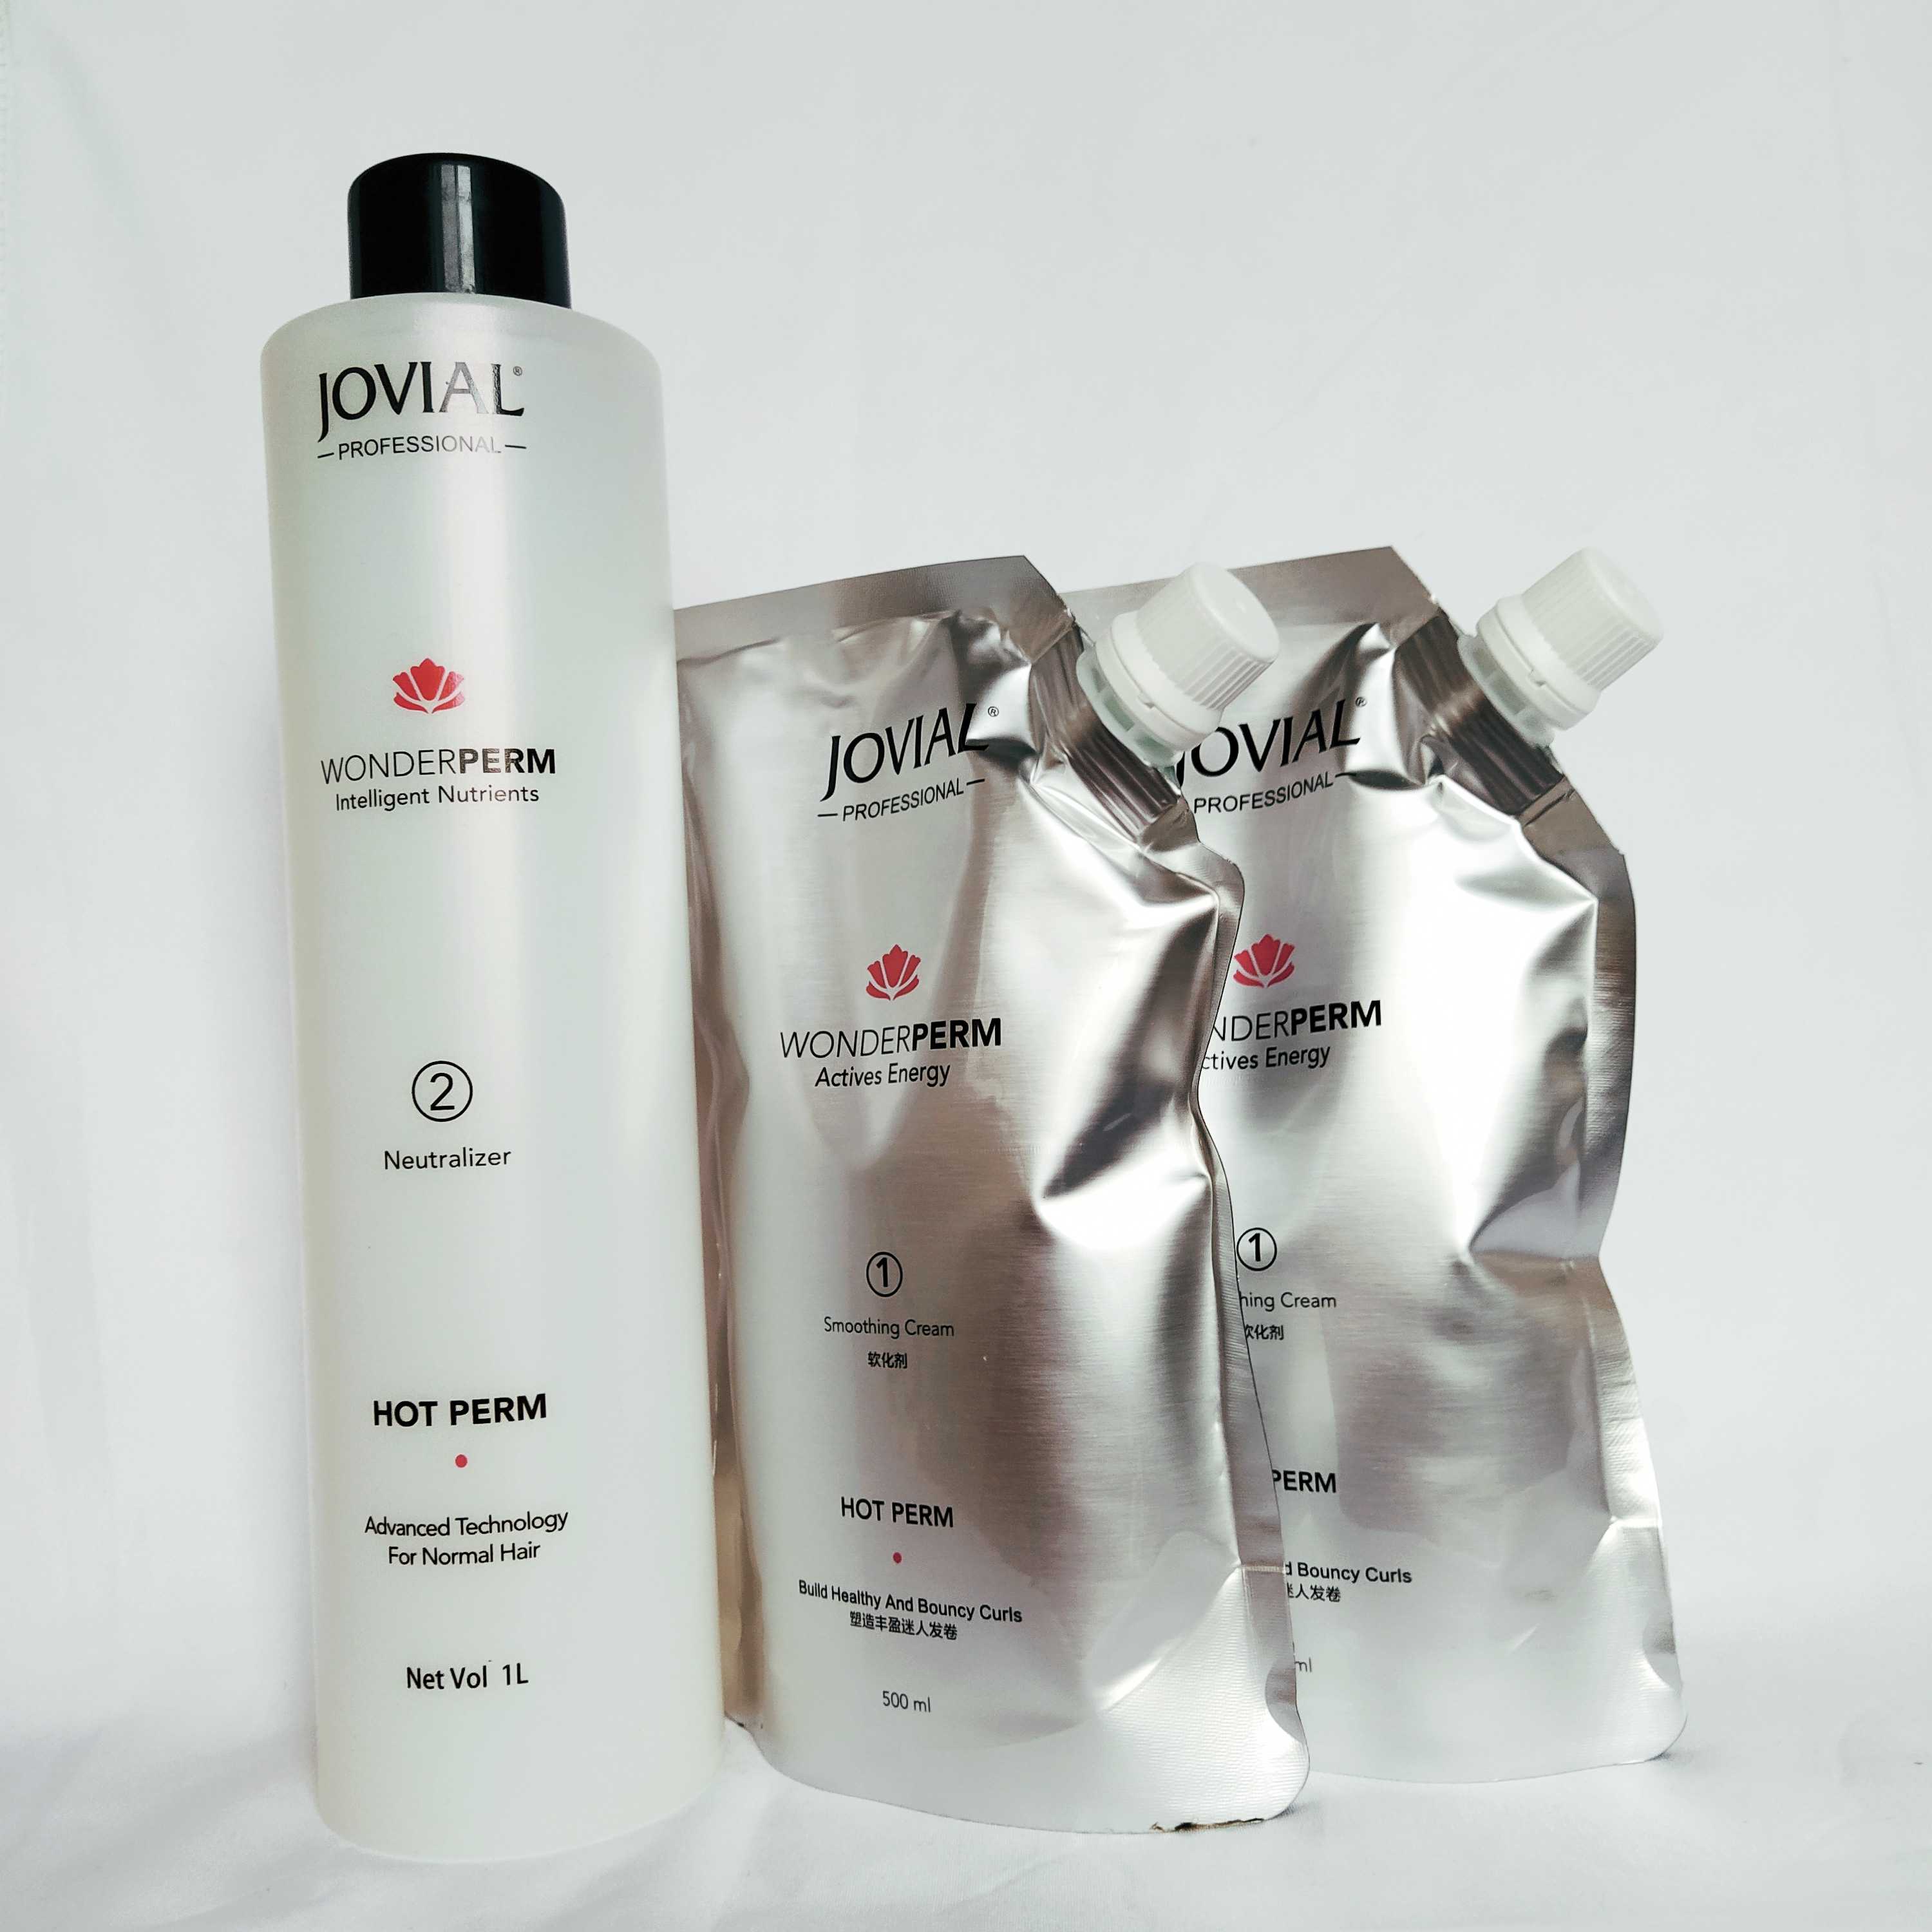 Qiaoweier Xinhuo intelligent perm 2 No.1 softeners, 1 bottle of 1l styling water to create rich and charming hair curls